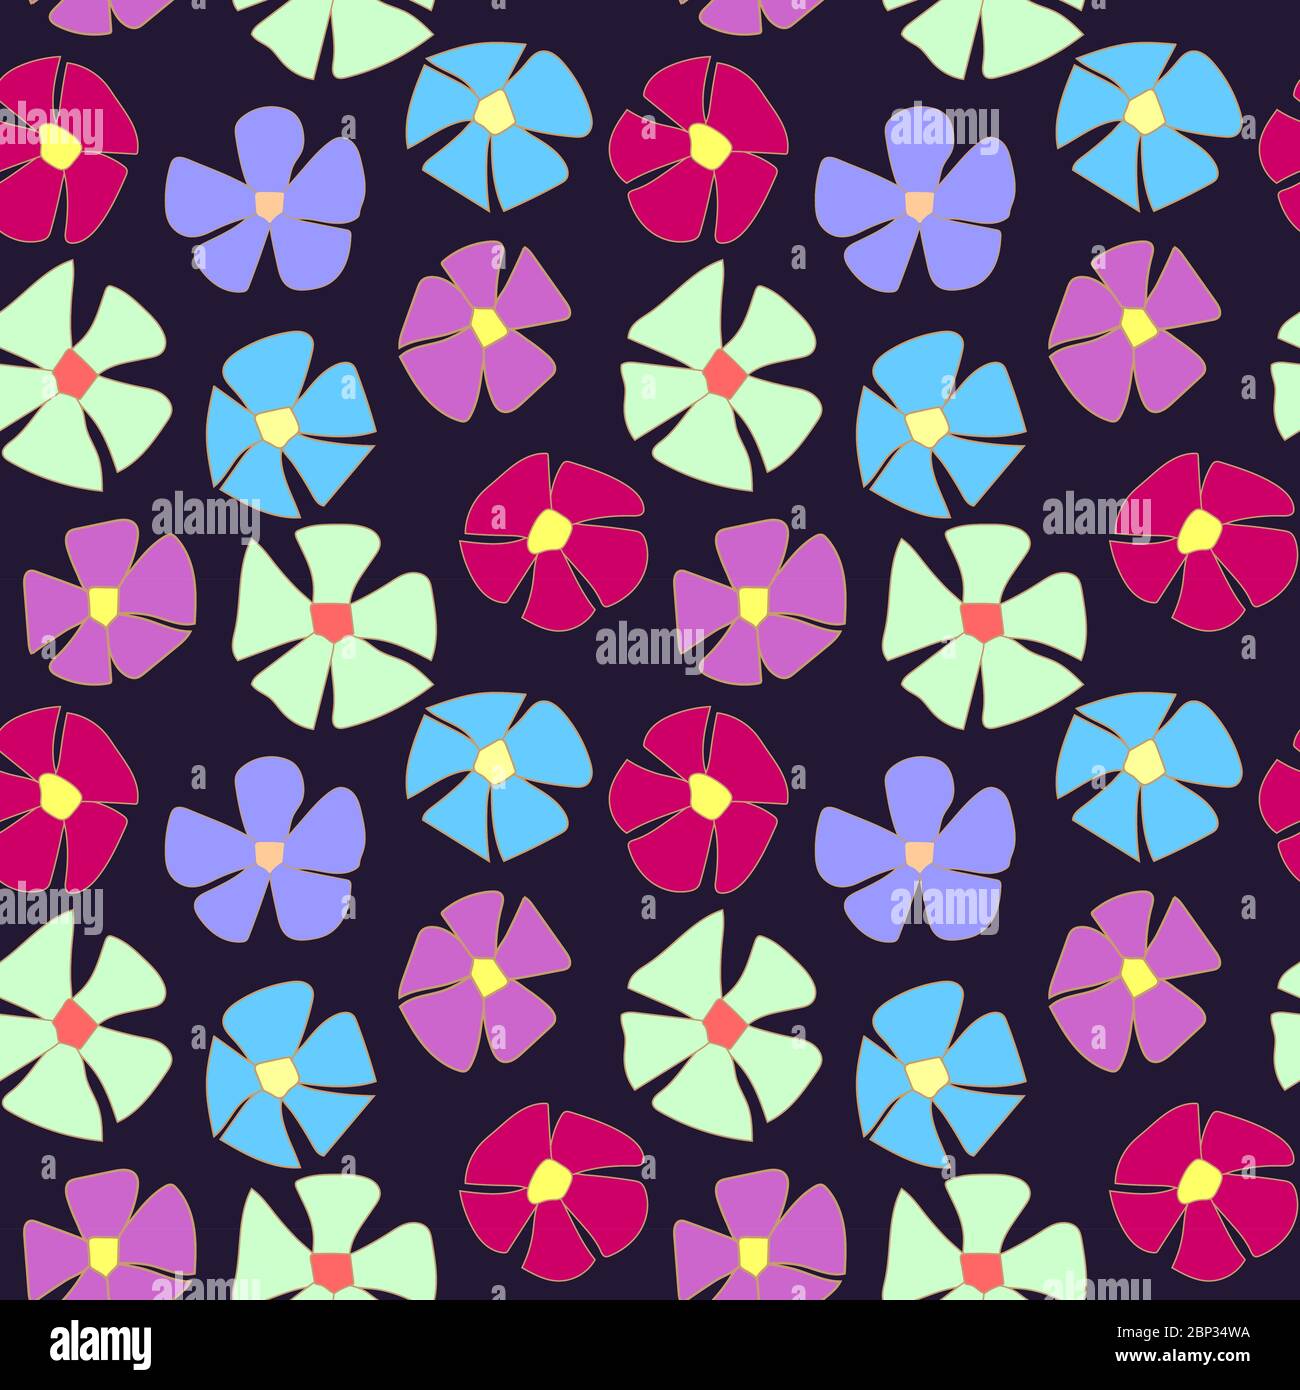 seamless pattern. many simple five-petalled flowers of violet, lilac, blue, burgundy and light turquoise on a dark background. Stock Vector